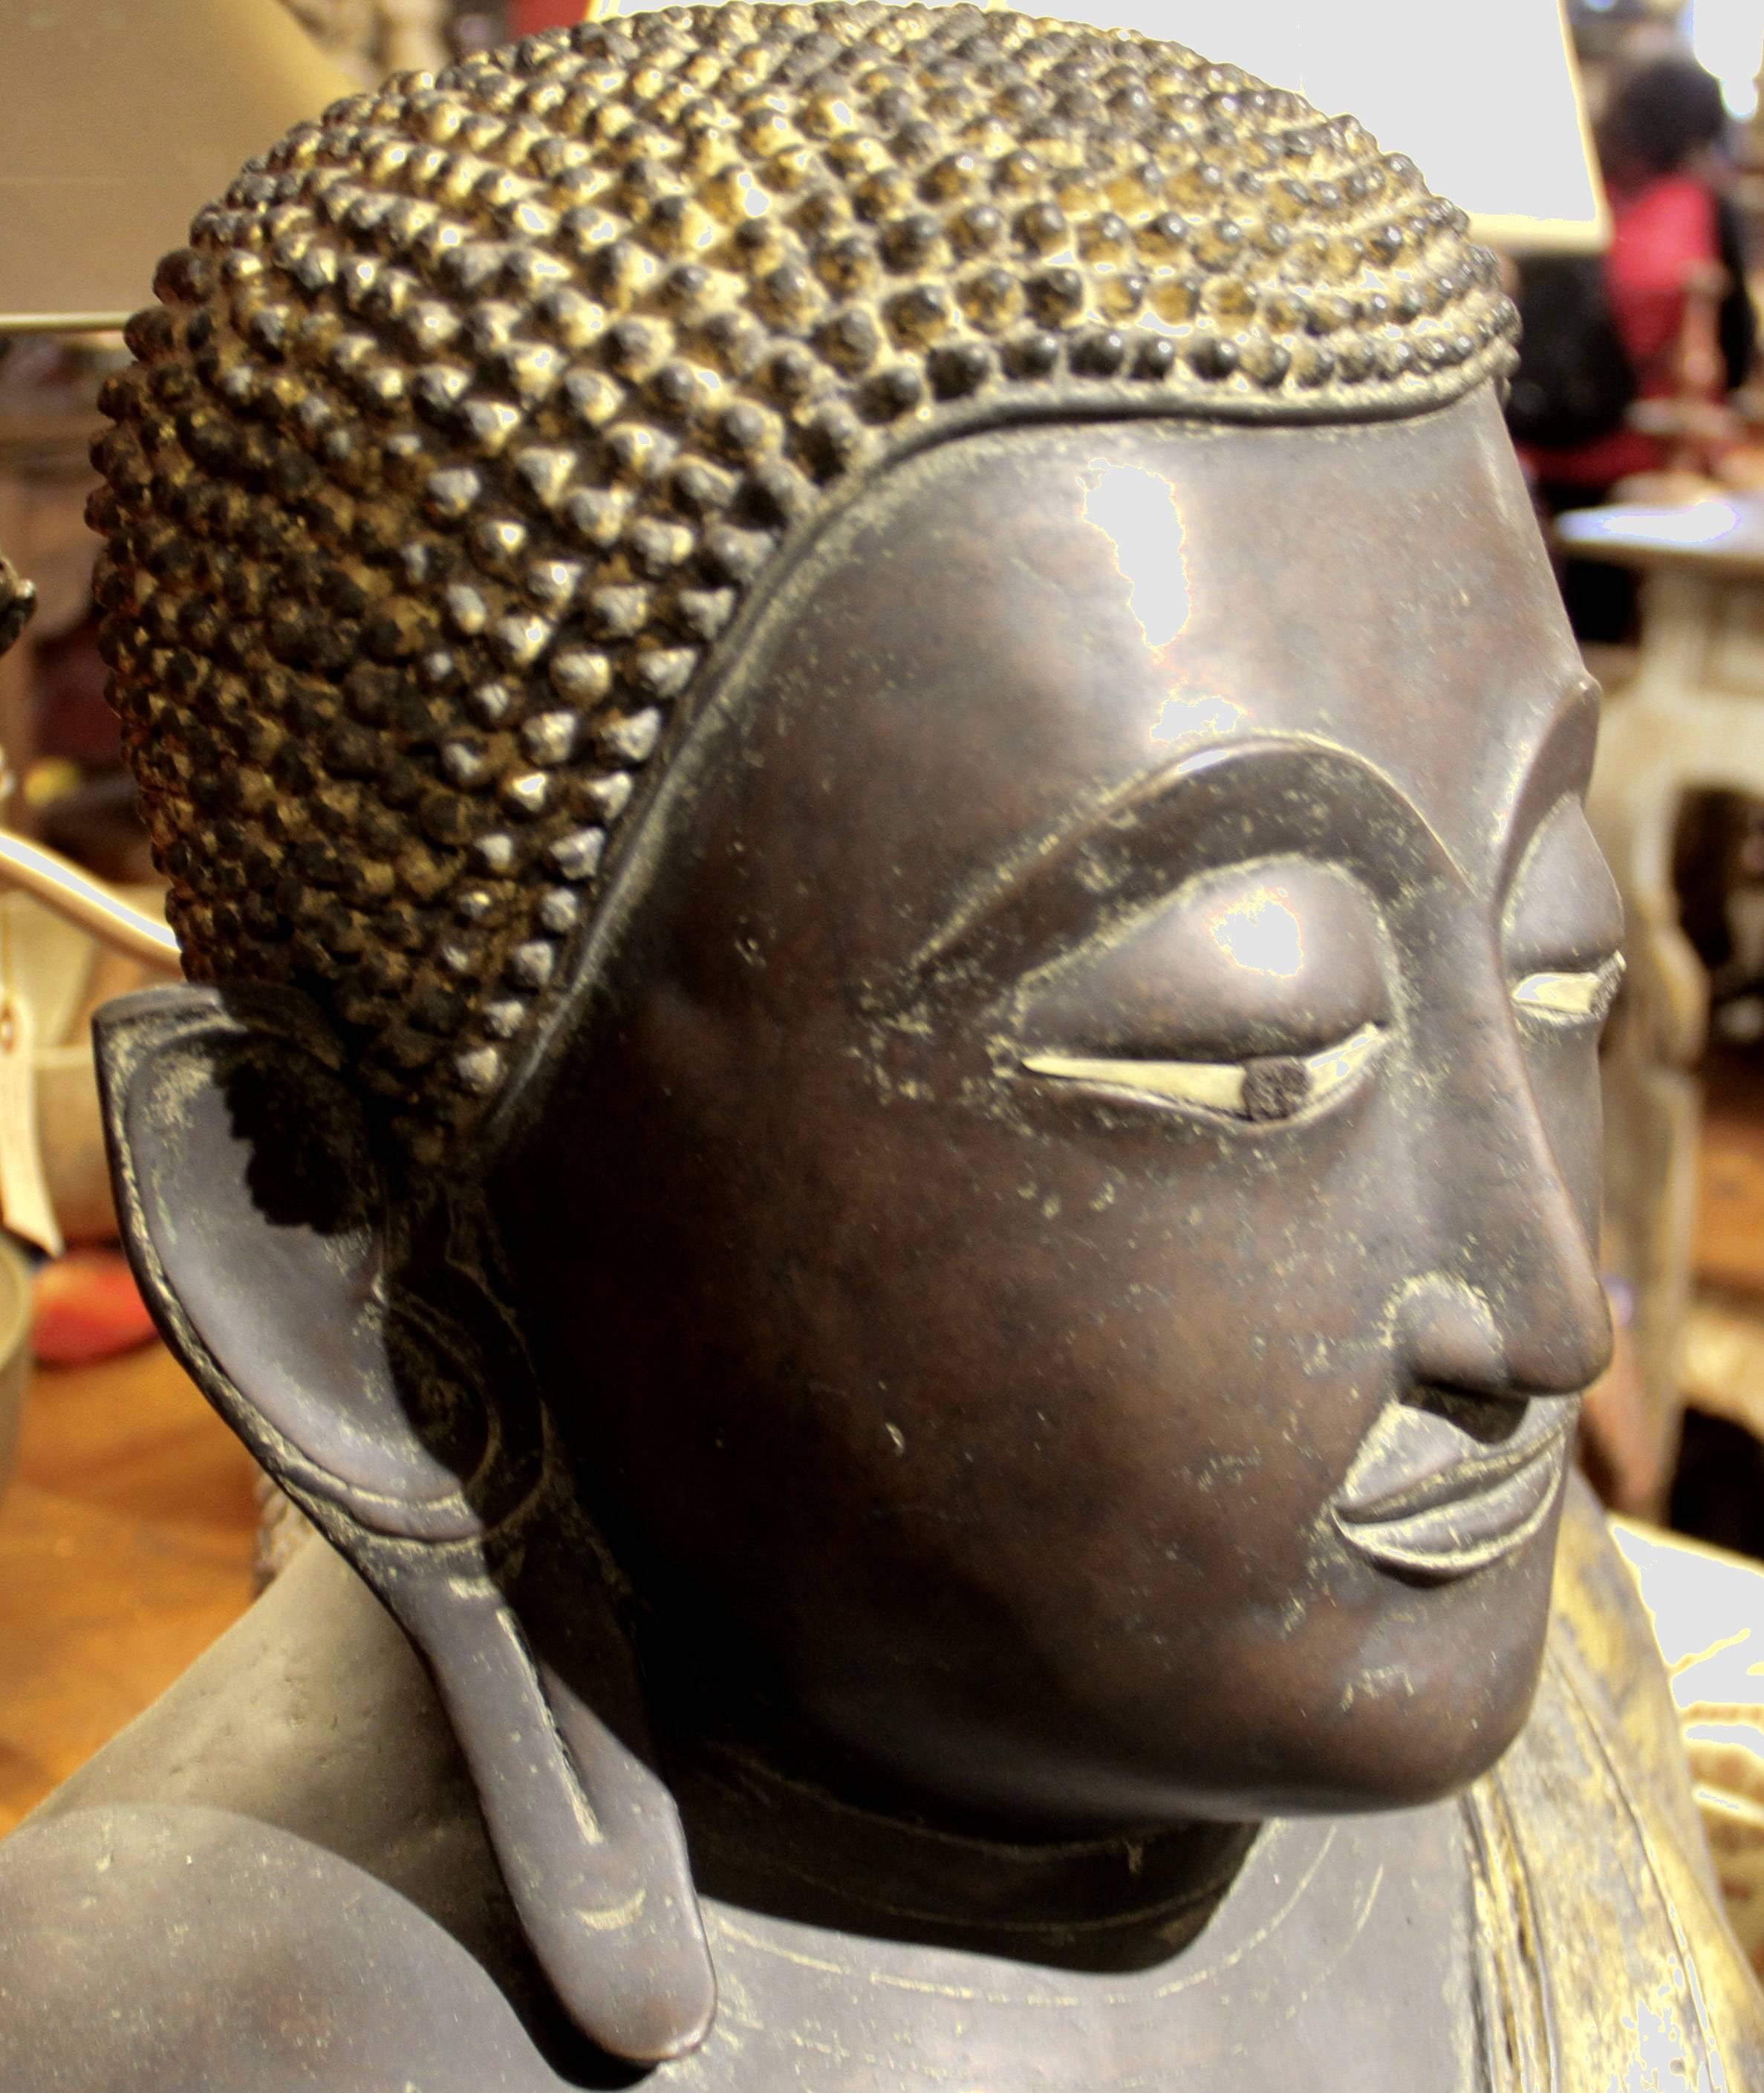 This prominent Buddha is from Thailand, 19th century.
Measures: 32 H x 32.5 x 12 D
It comes from the Rattanakosin Kingdom, which is the fourth and present traditional centre of power in the history of Thailand (or Siam). It was founded in 1782